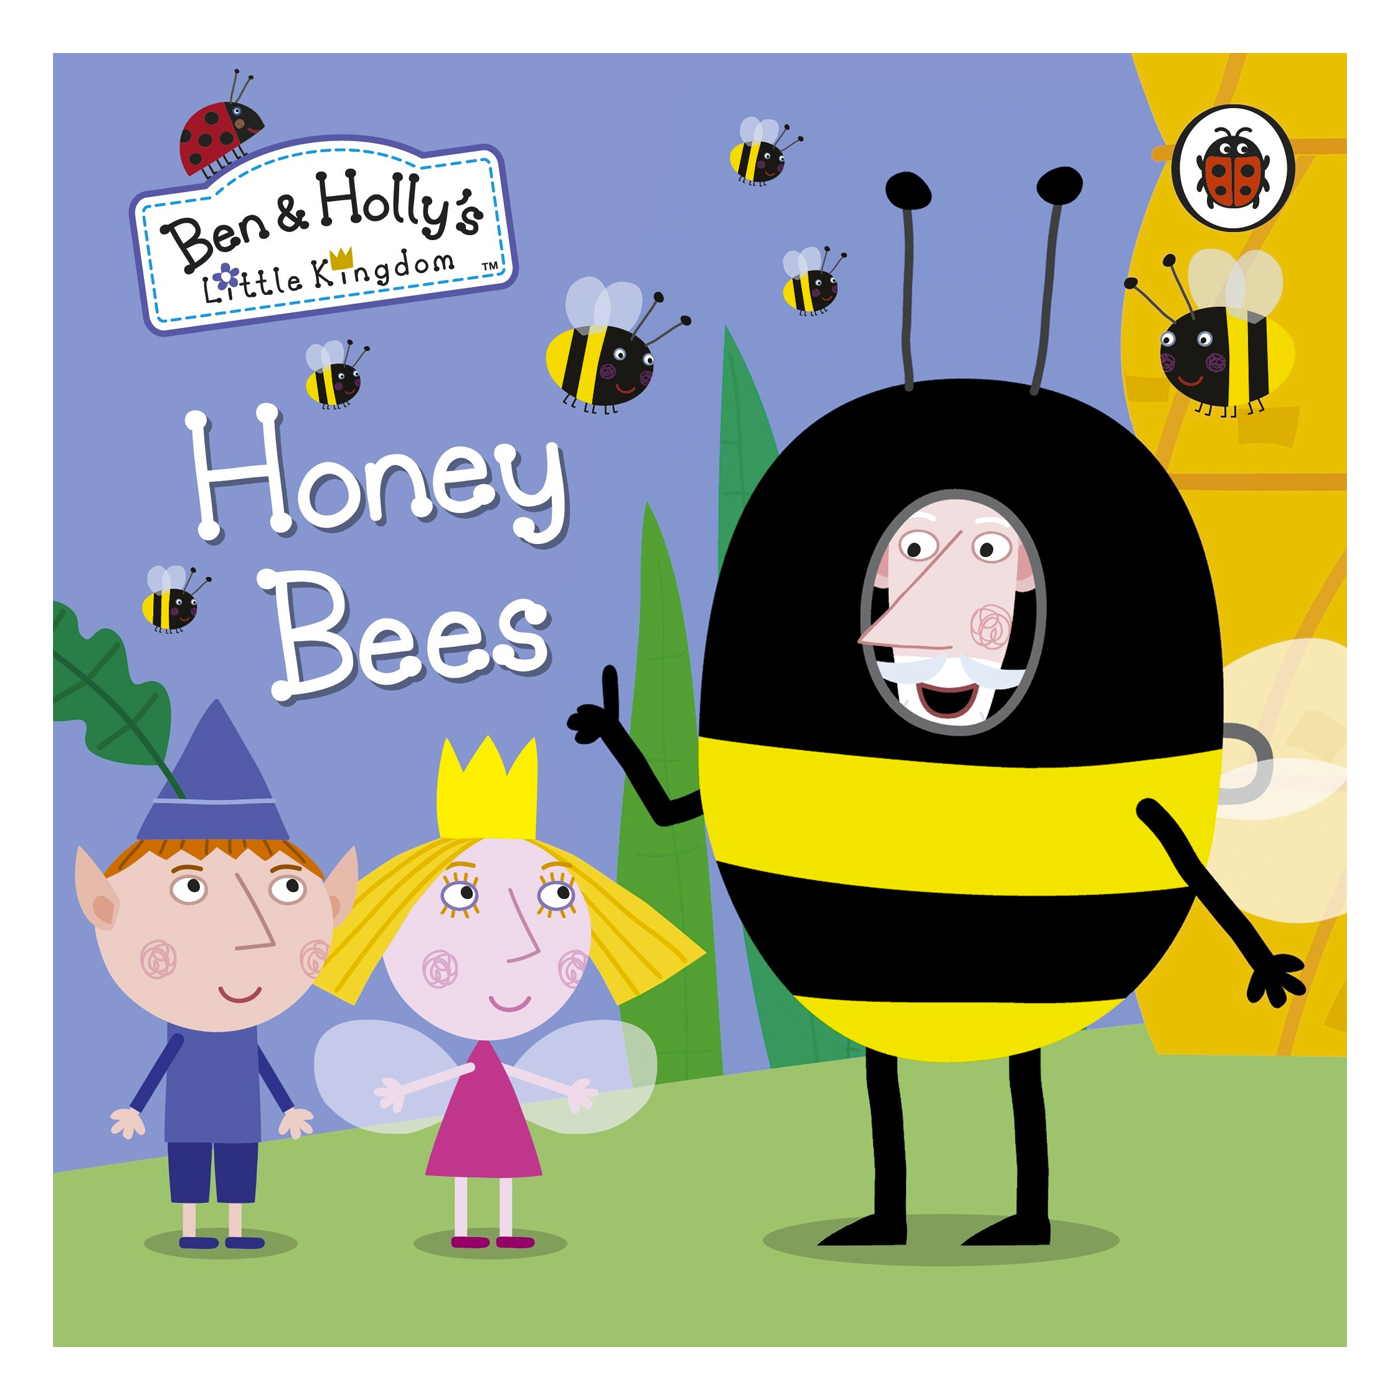  Ben And Holly's Little Kingdom: Honey Bees